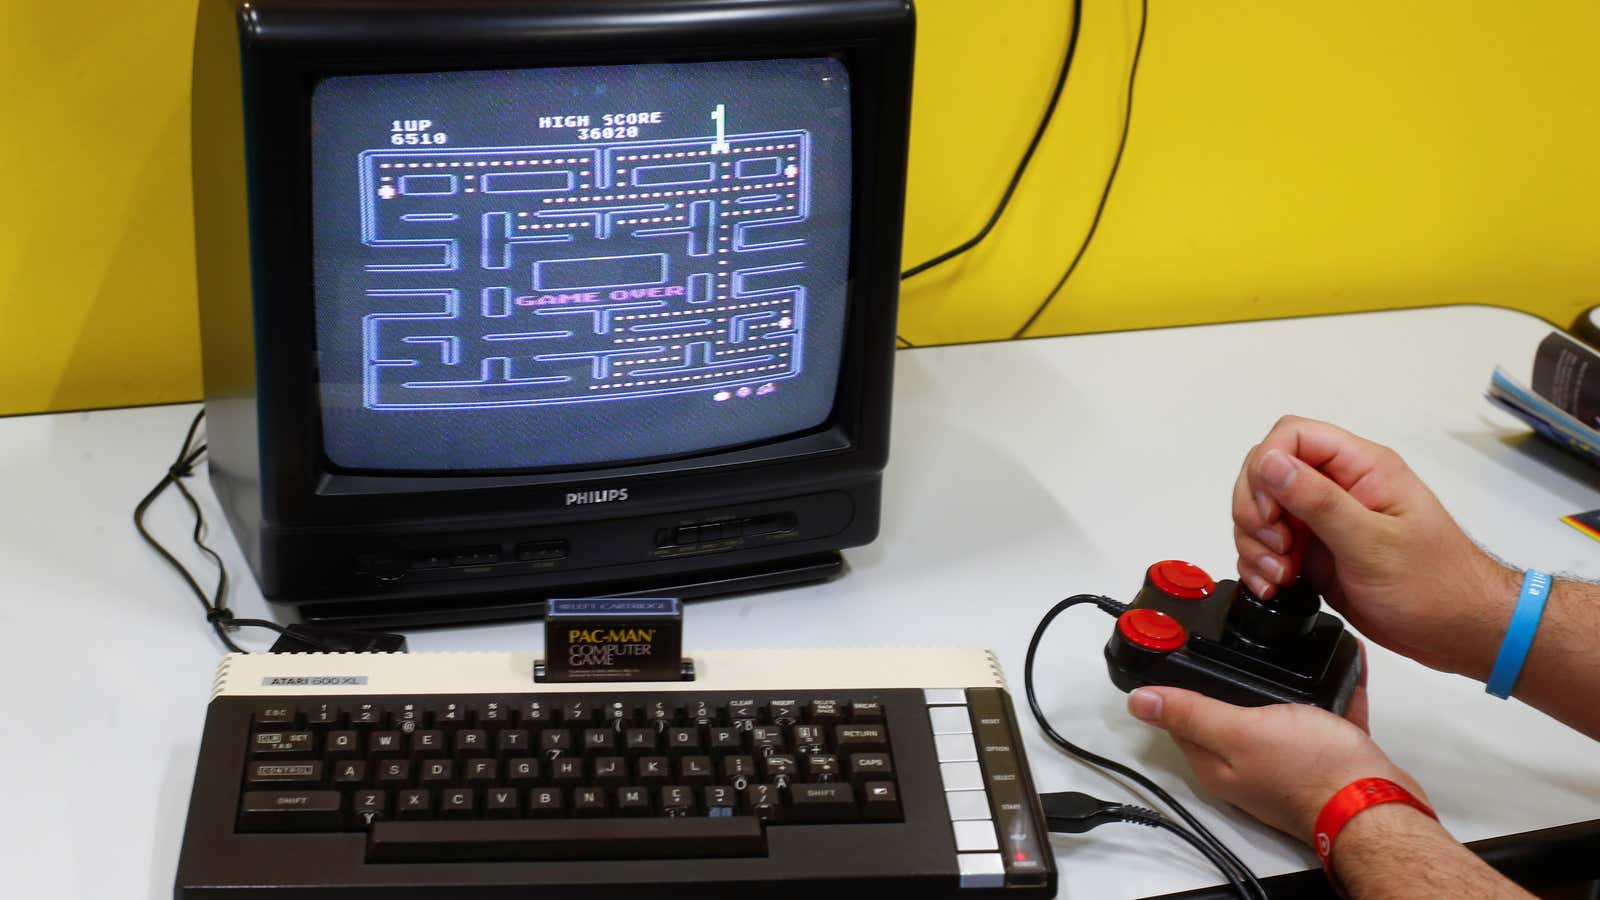 40 years after Pac-Man, we still don’t understand what games are about.